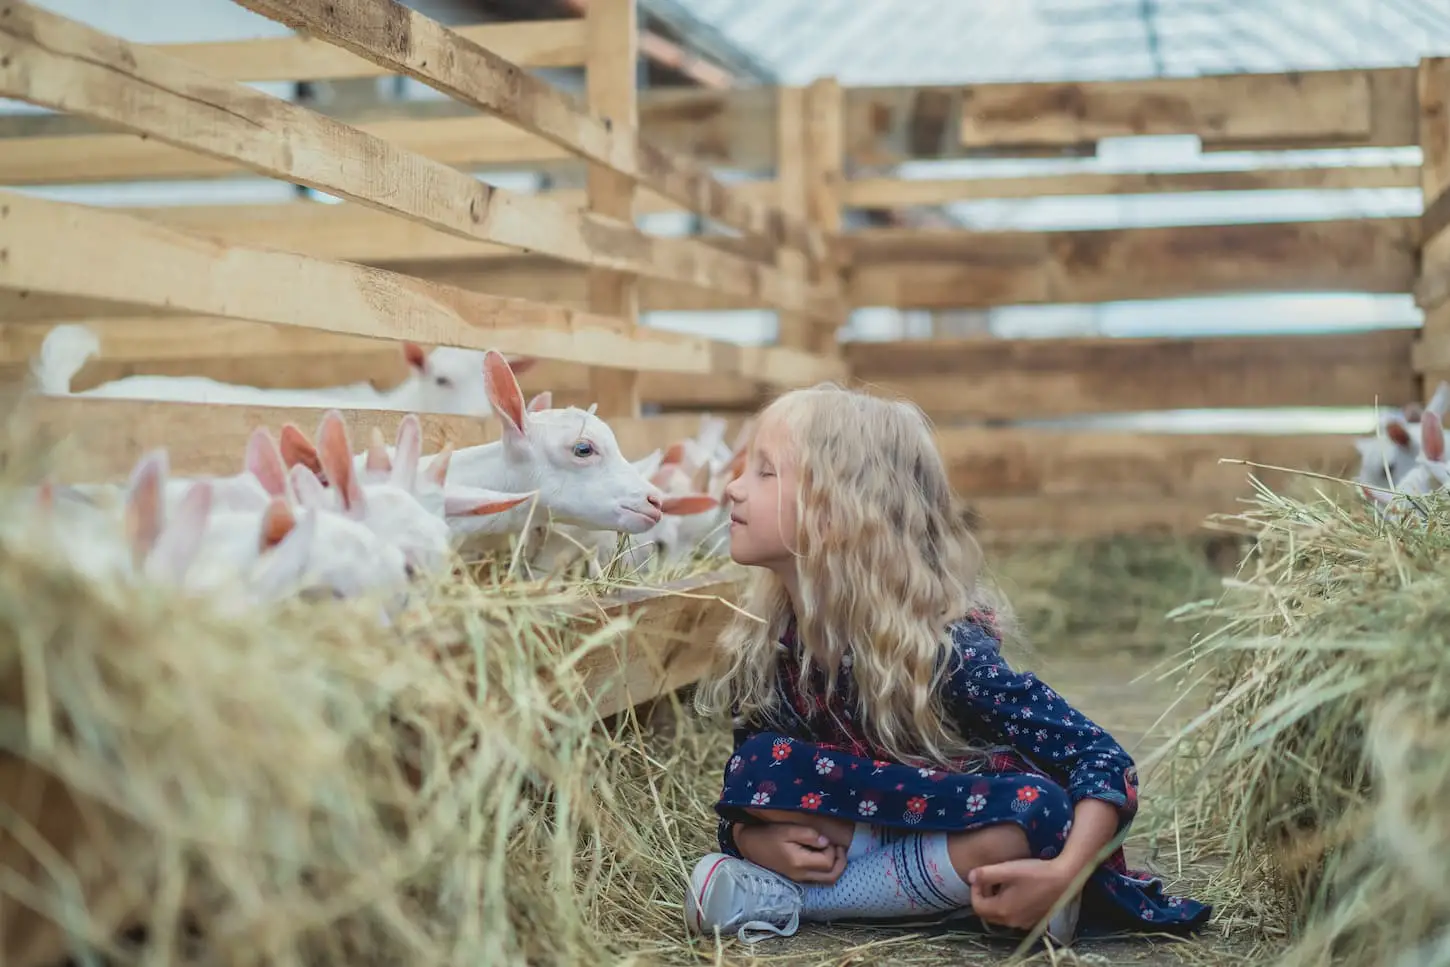 An image of a little girl kissing a little goat in a farmyard.